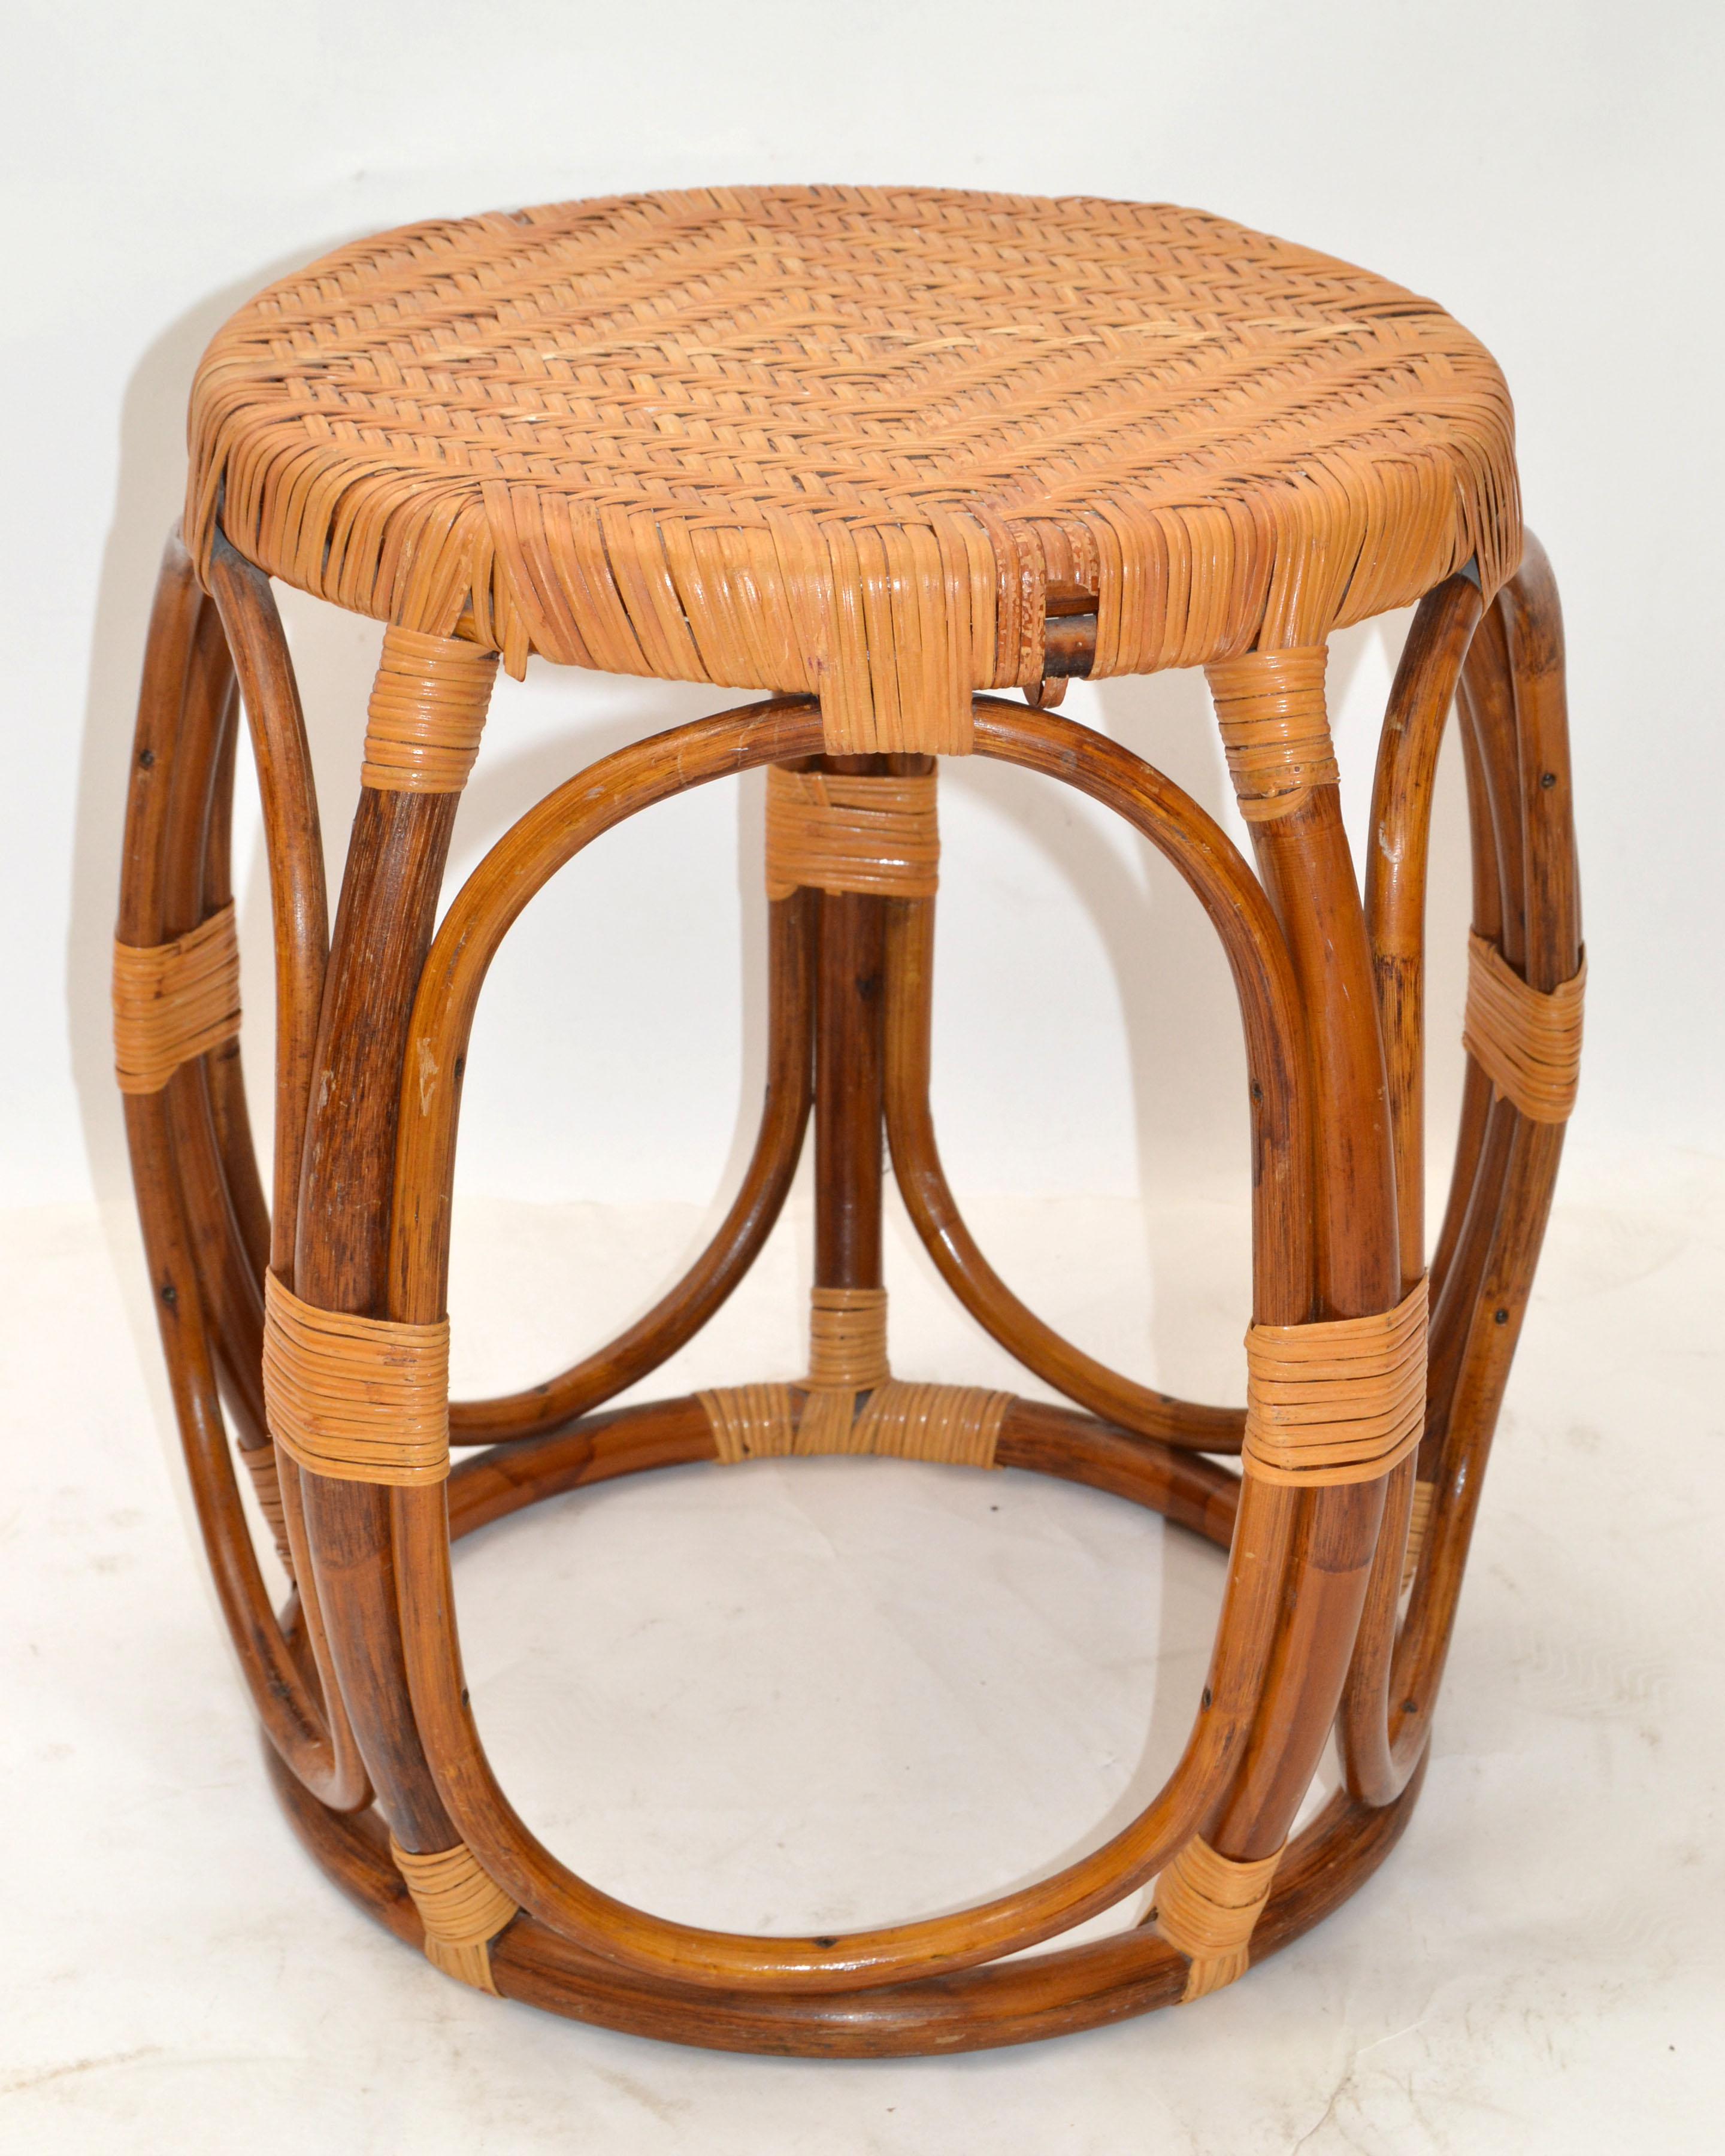 All handwoven wicker and rattan drum table, side table, drink table or stool in Bohemian period style.
Top diameter measures: 13.75 inches.
Height: 16 inches.